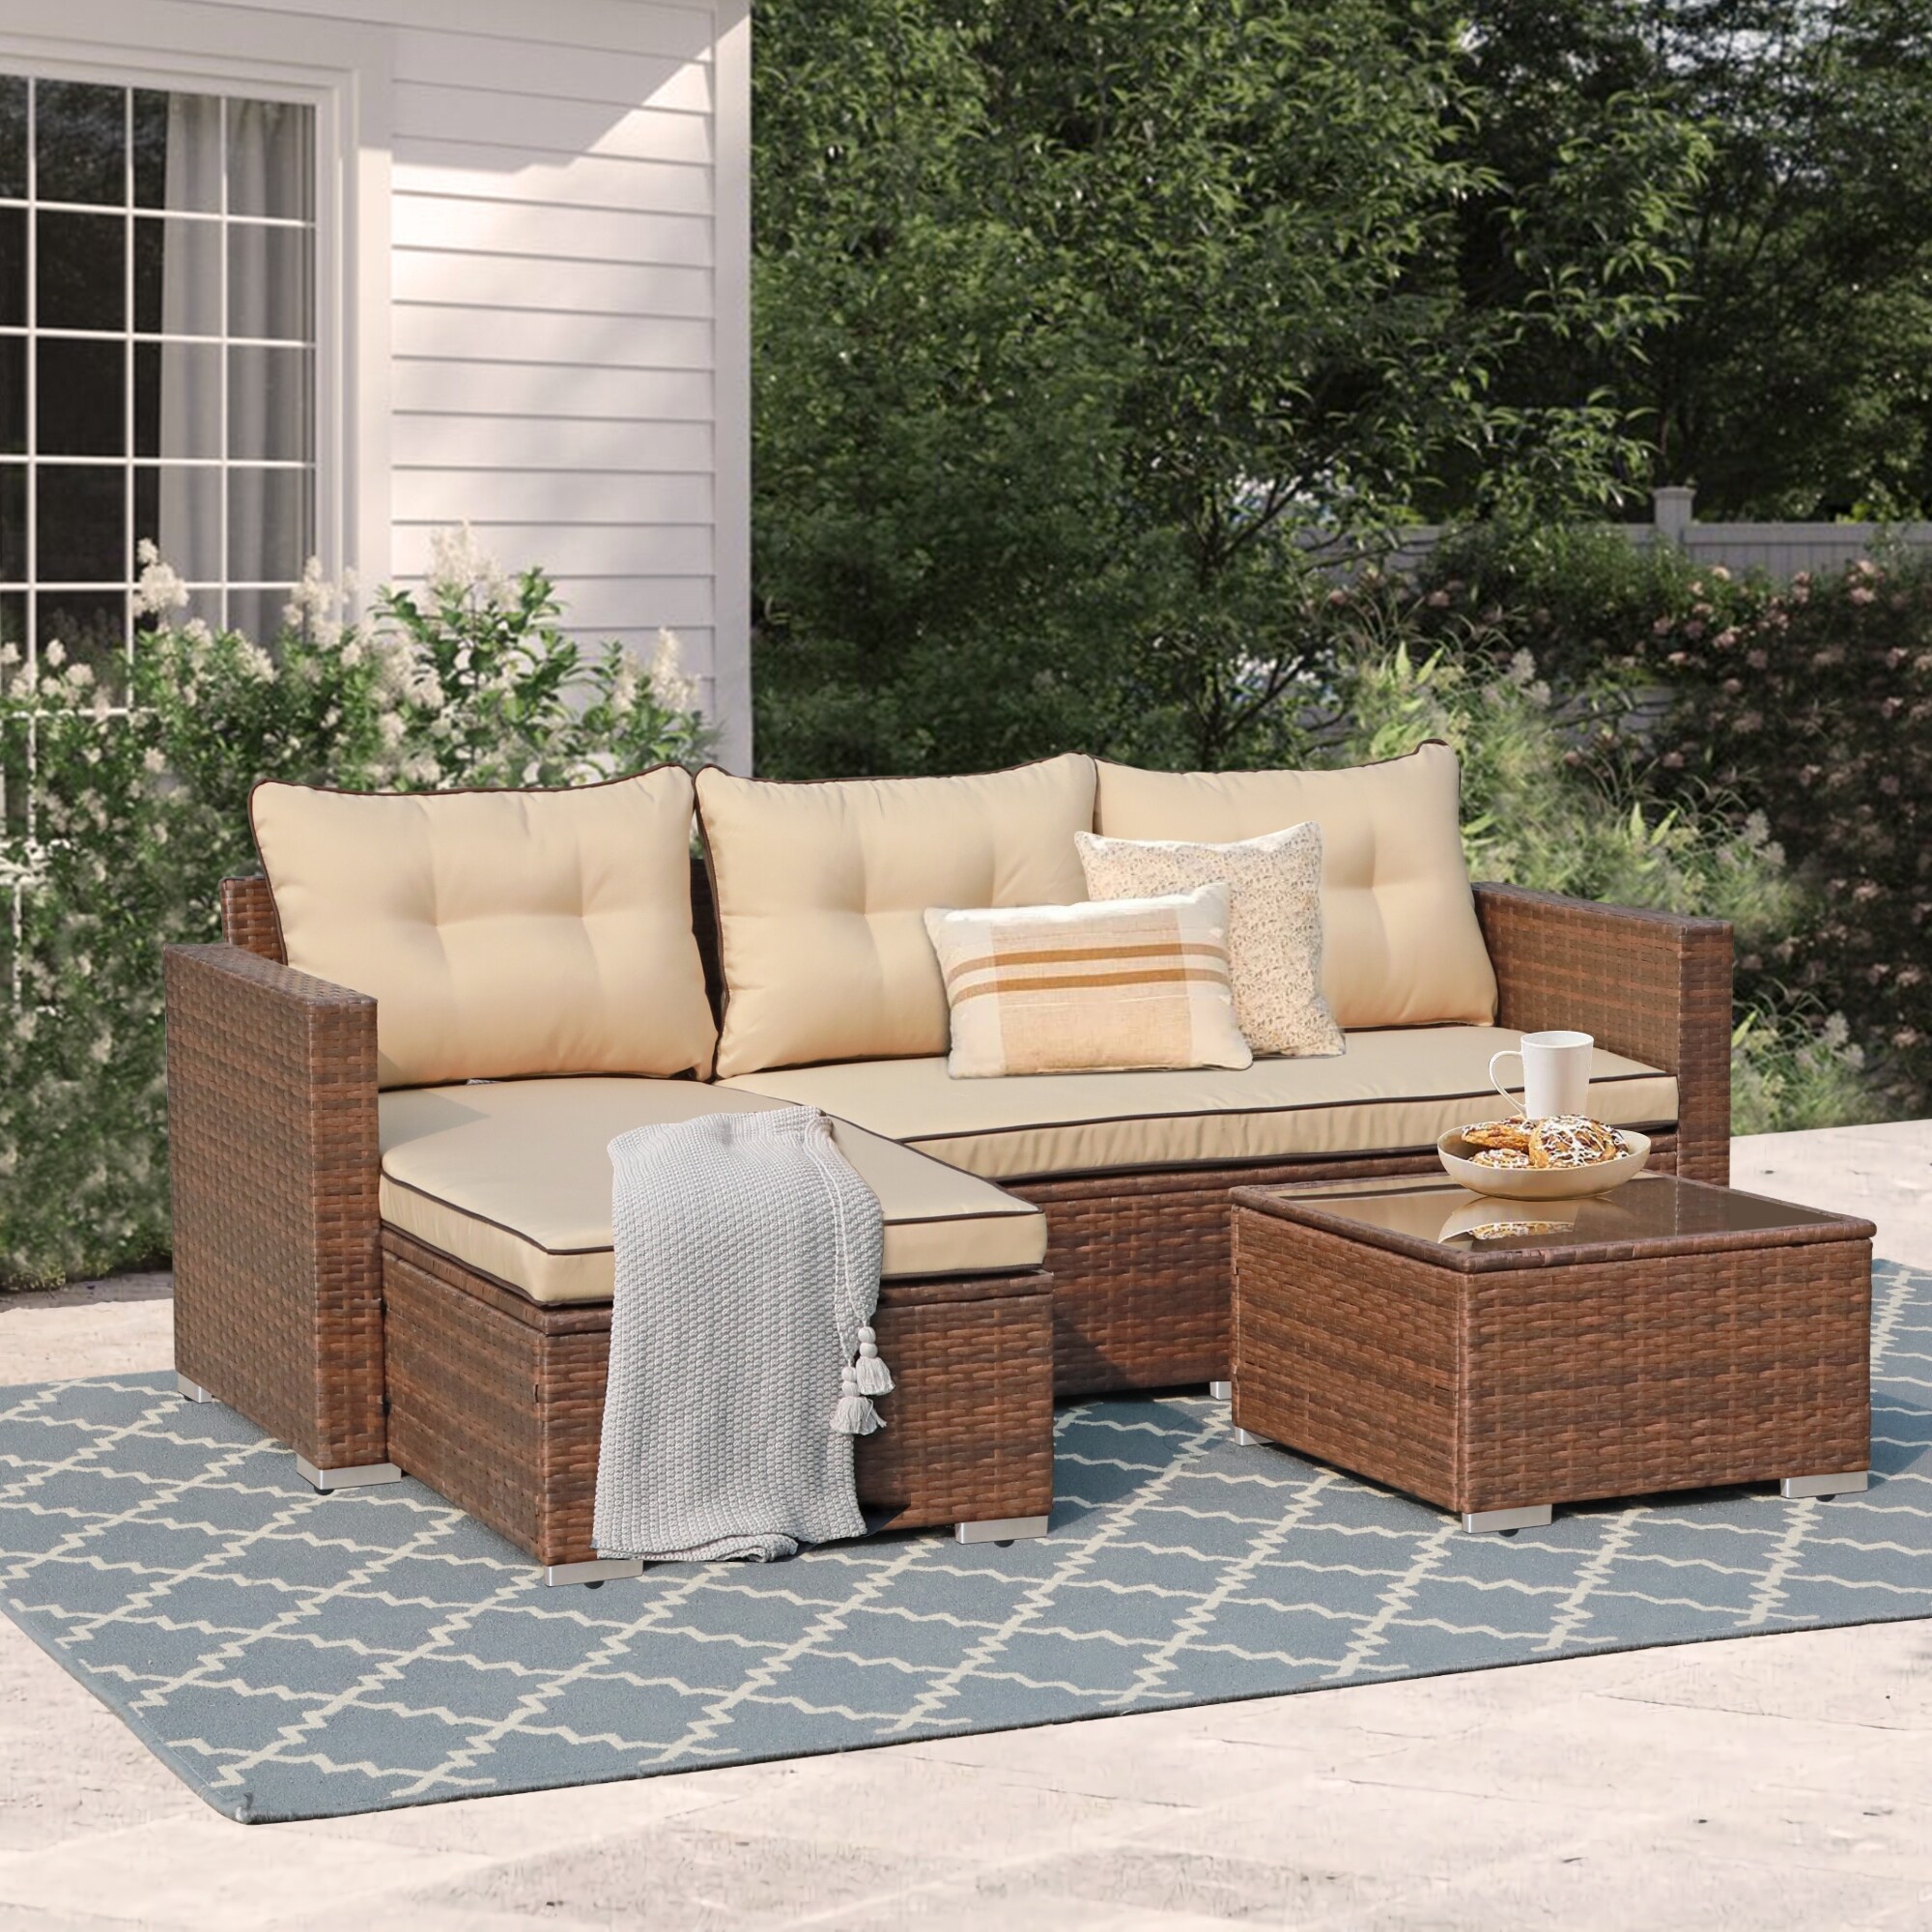 3 PCS Patio Conversation Couch Furniture Home Wicker Rattan Sofa Sectional Set 